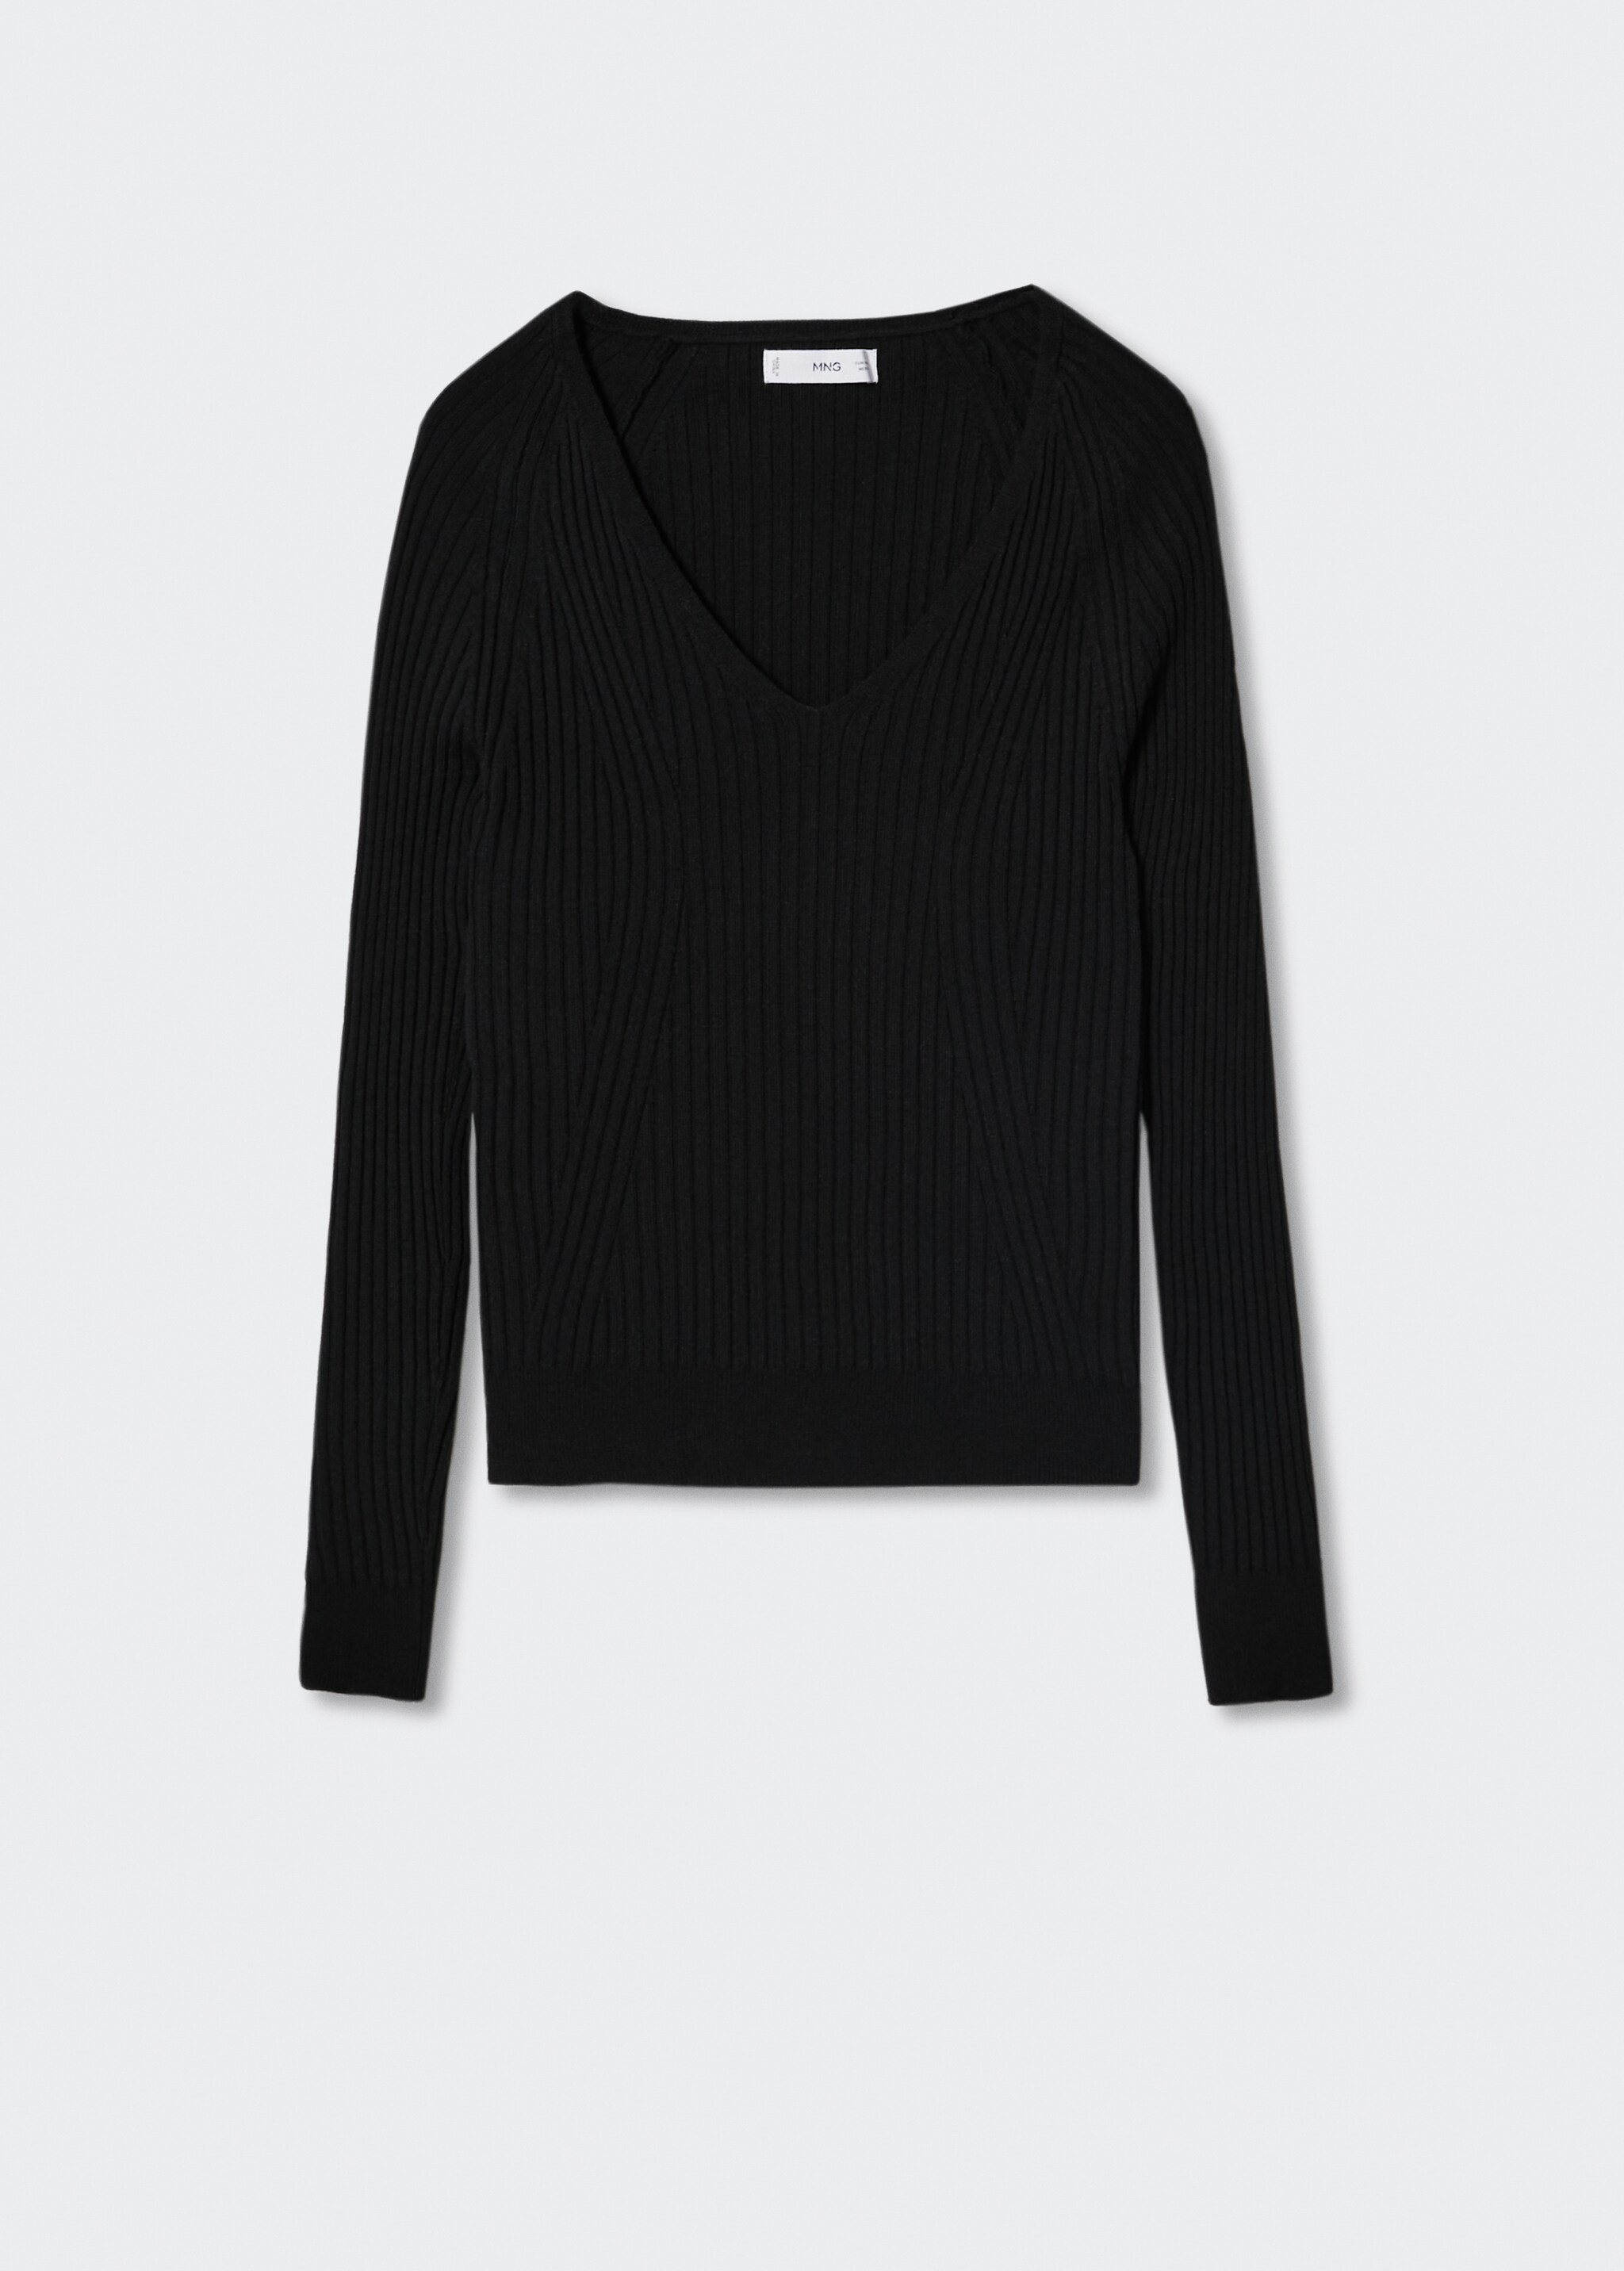 V-neck ribbed knit sweater - Article without model